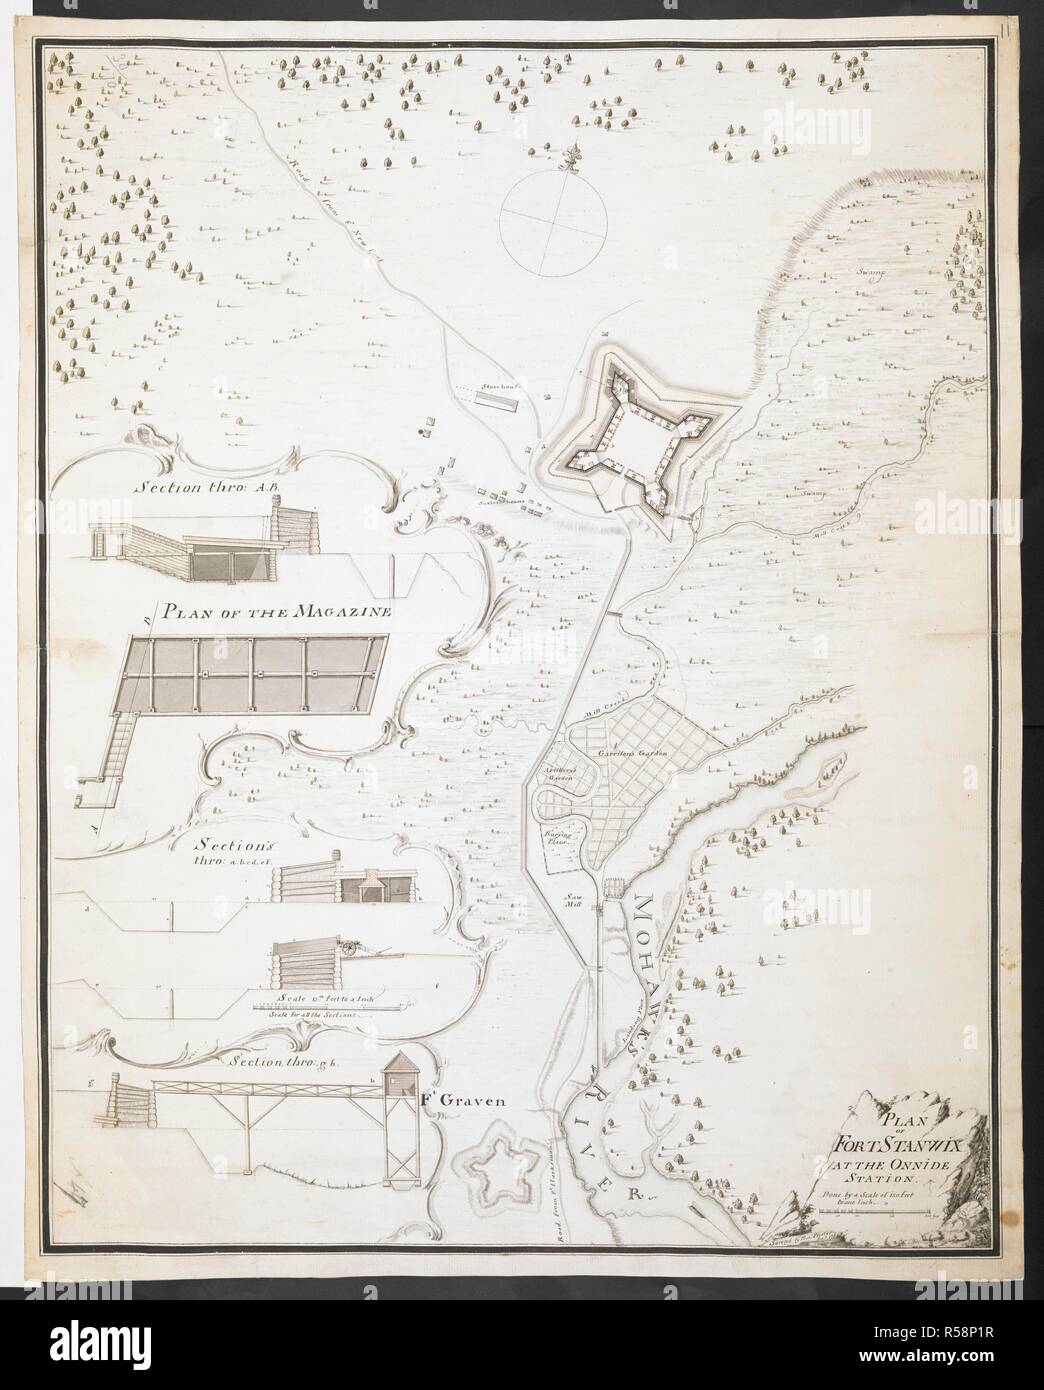 Plan of Fort Stanwix at the Onnida station', surveyed by 'Fran. Pfister Ens. 1760.'   . R.U.S.I. MAPS. Vol. LXXVI (1-13). 57711 (1-4). Places in states North-East of New York. 18th century. 1764. 1:1800. 'Scale of 150 feet to one inch'. Scale bar of 300 feet (= 2 inches). Inset, sections of the fort. 1:180. 'Scale for all the sections 15 feet to an inch'. Scale bar of 40 feet (= 2 inches). 560 x 445mm. Source: Add. 57711.11 Amherst no. A 47. R.U.S.I. no. A 30.70. Stock Photo